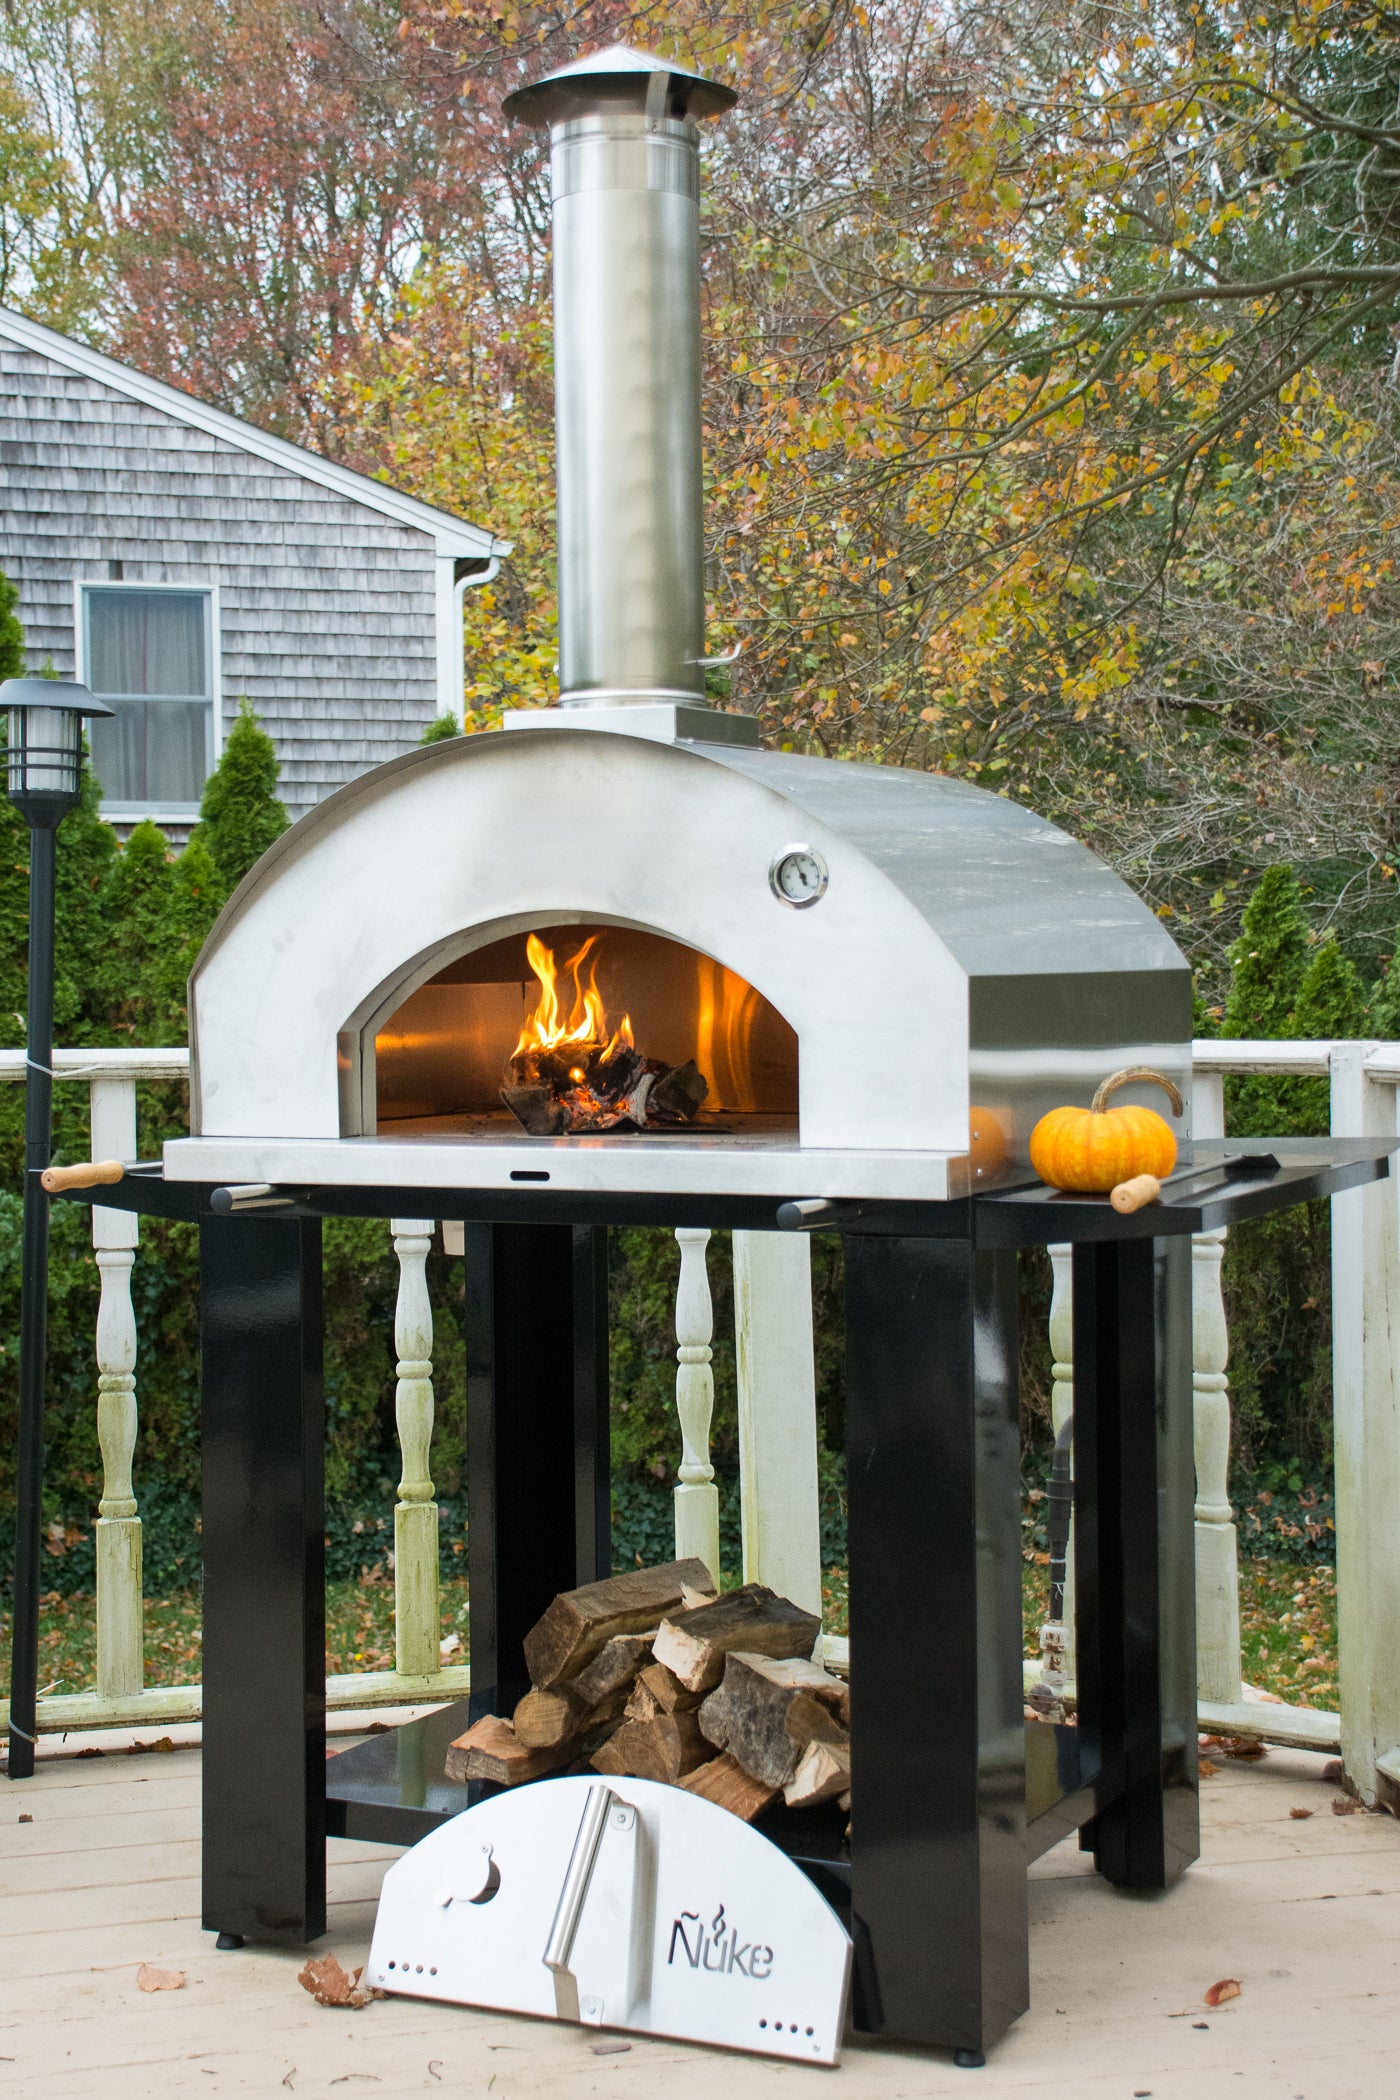 Press Release: Ñuke Launches the Pizzero Wood-Fired Outdoor Pizza Oven